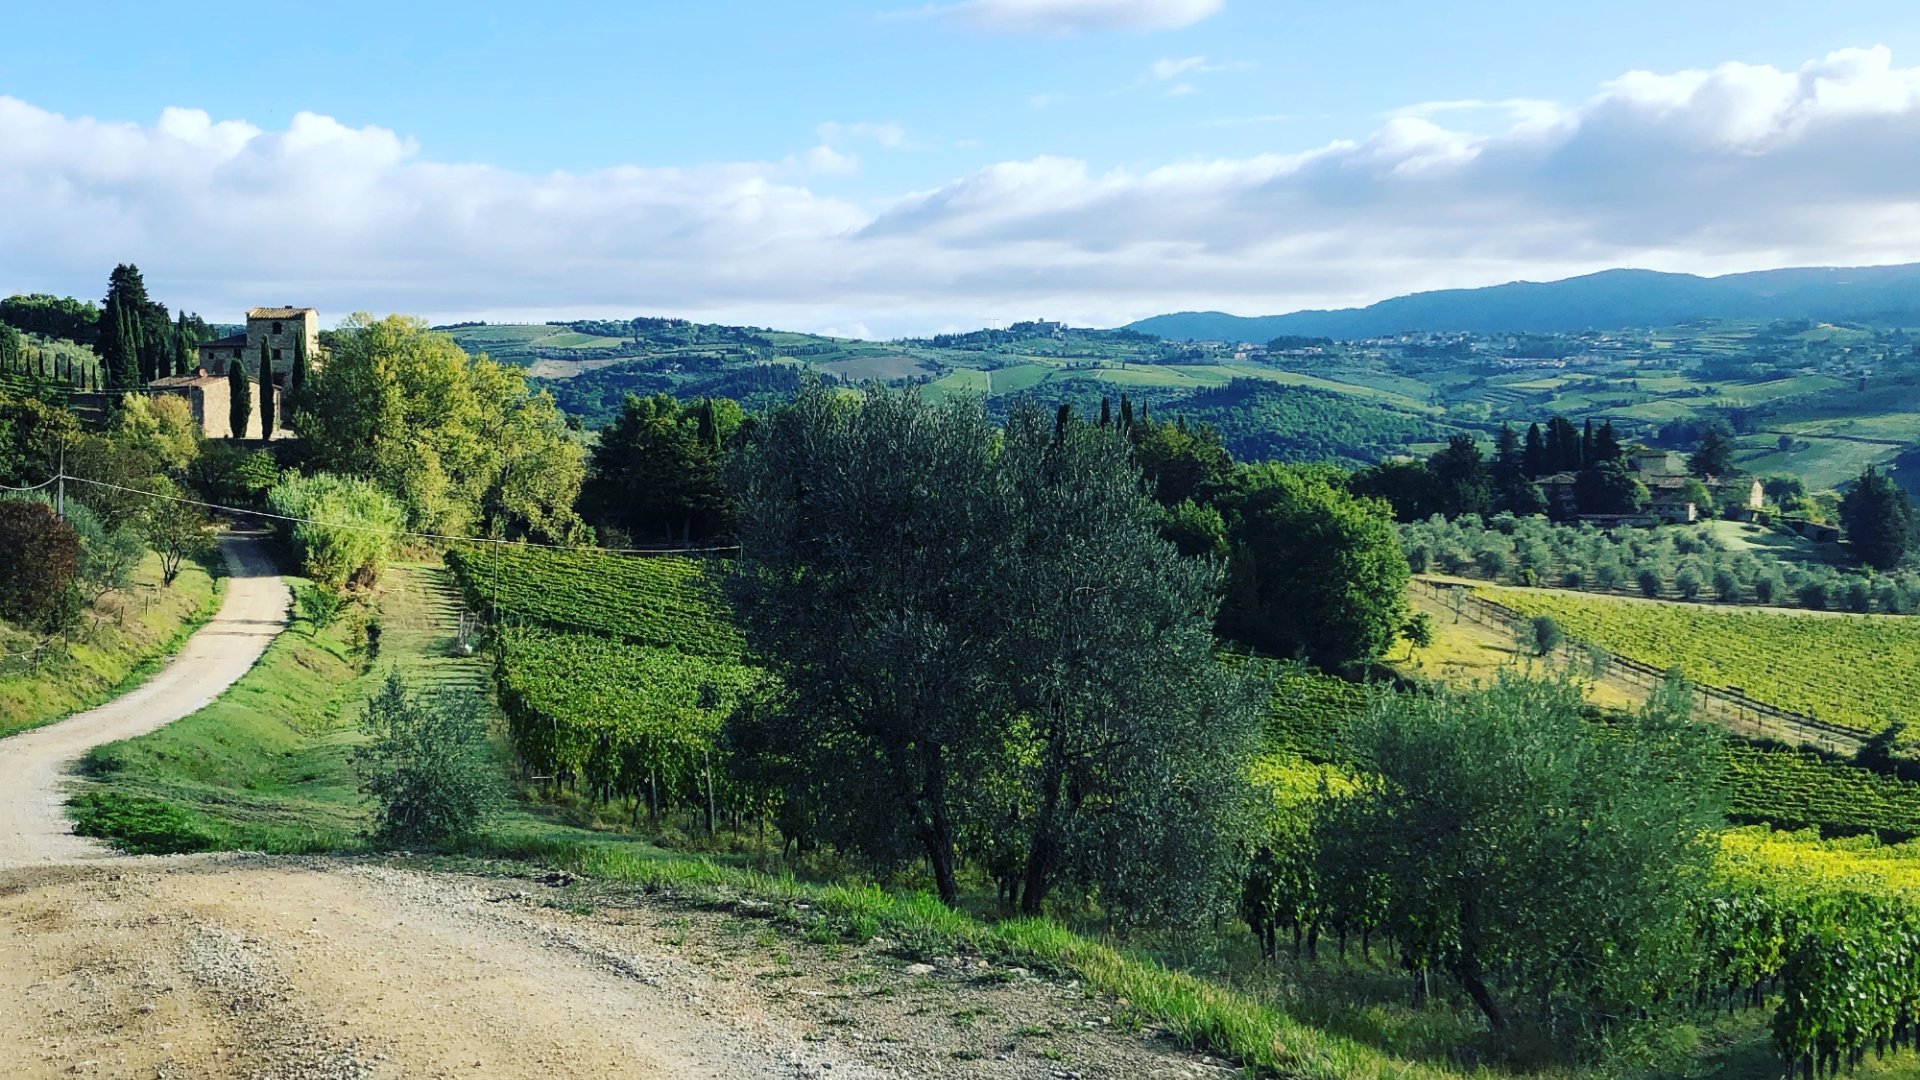 Chianti Classico wine tasting and hiking adventure among the vineyards and olive groves